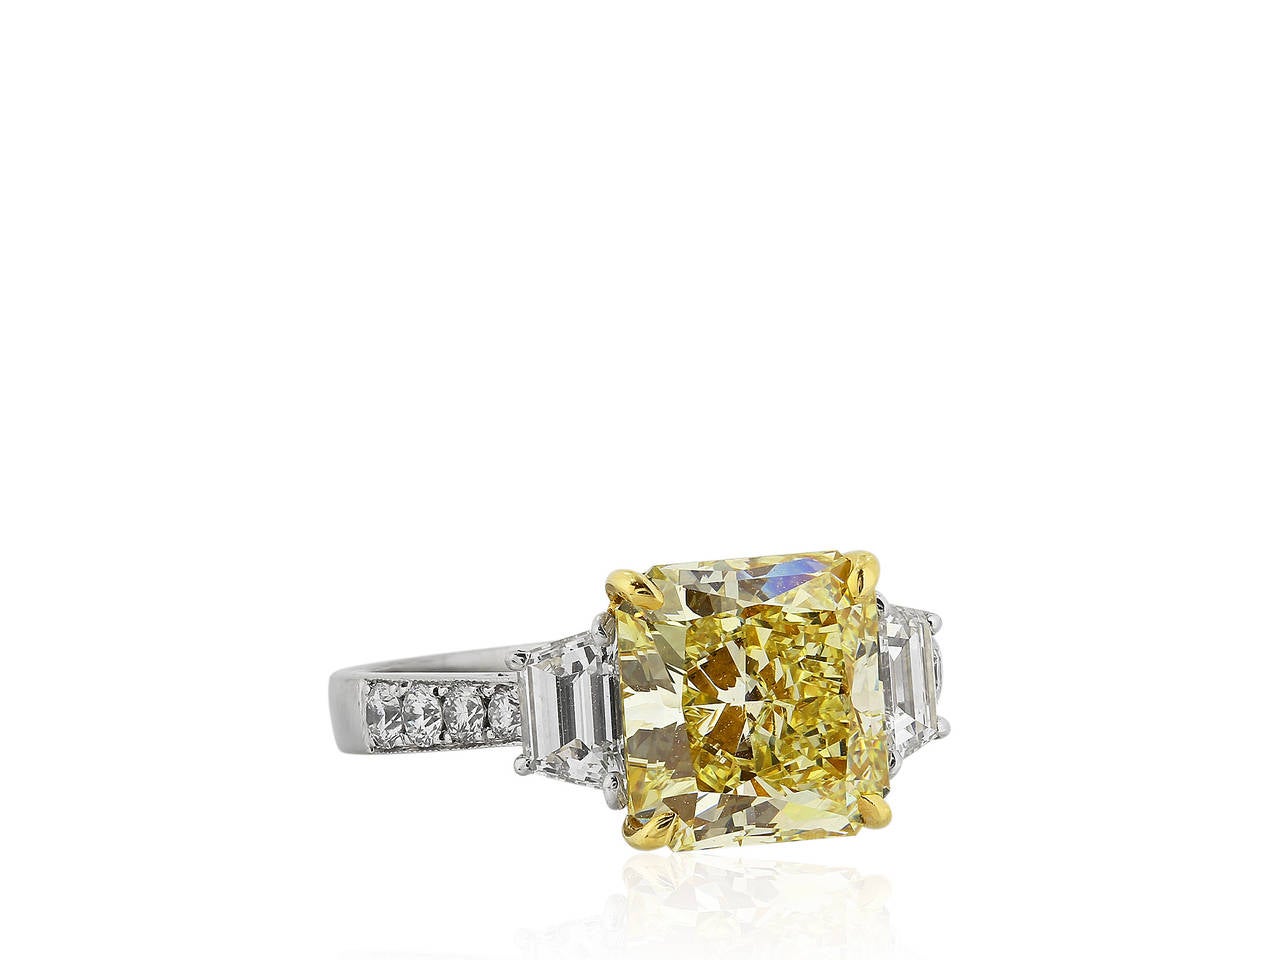 Platinum and 18 karat yellow gold 3 stone ring consisting of 1 radiant cut canary diamond weighing 3.77 carats having a color and clarity of FY / SI1 with GIA certificate #2125070218, the center stone is flanked by 2 step cut trapezoid diamonds and